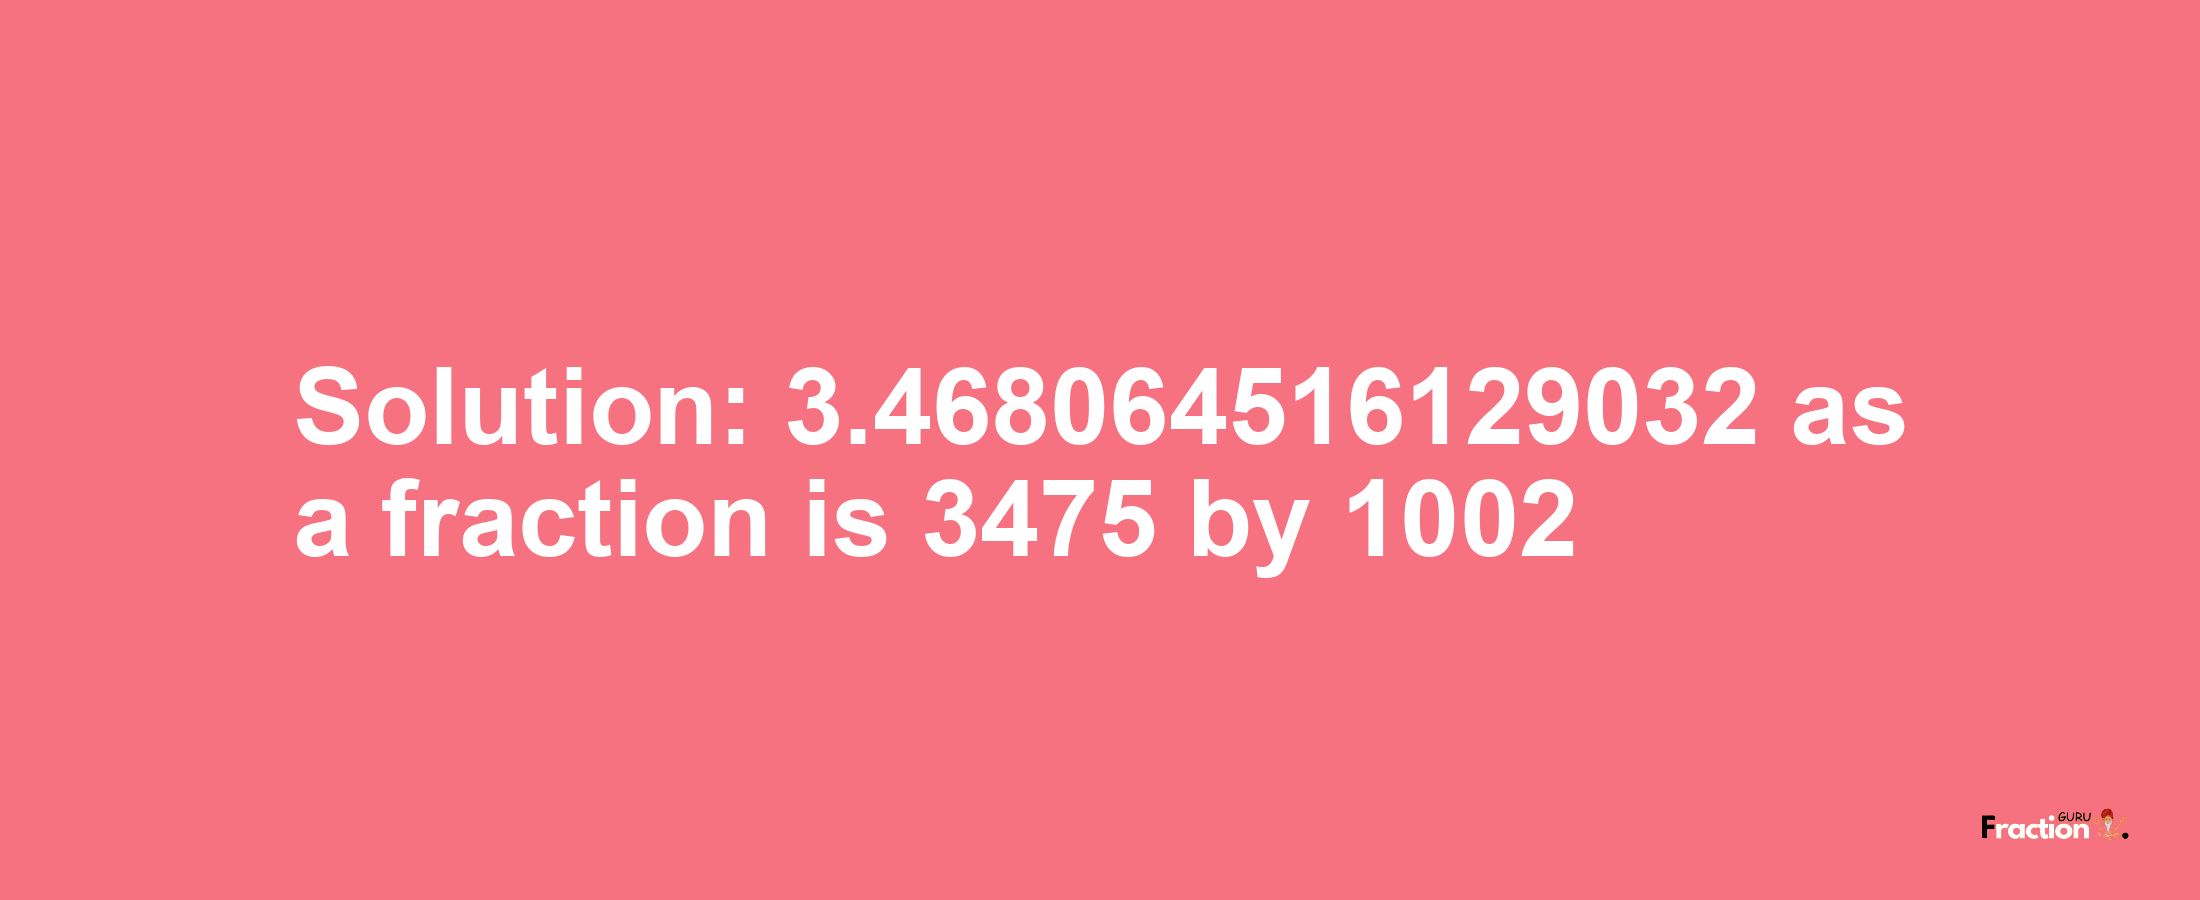 Solution:3.468064516129032 as a fraction is 3475/1002